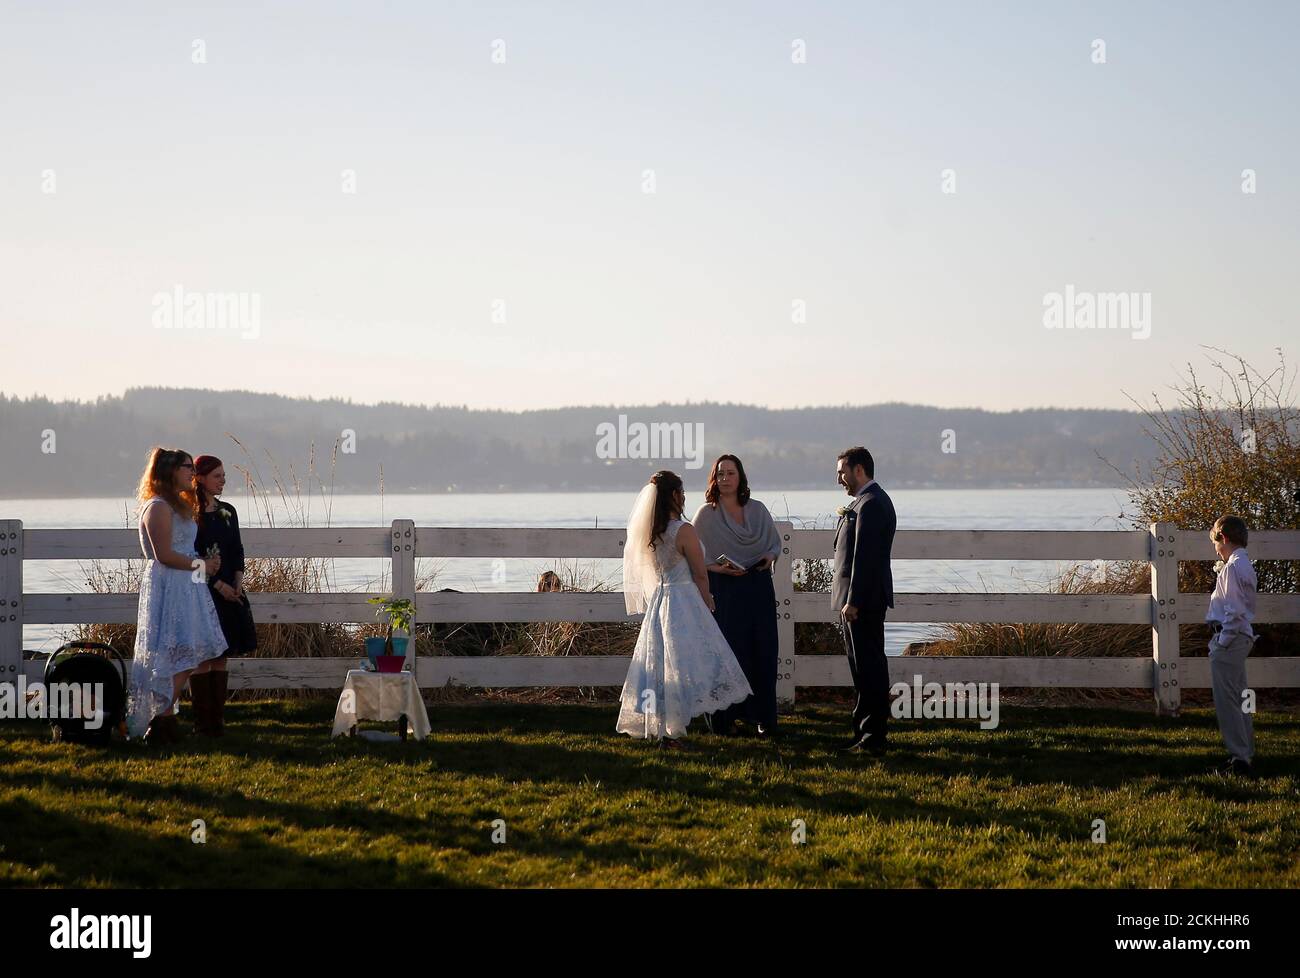 Benji Mincy and Matt Friedman listen to officiant Leah Hausman during a much smaller wedding ceremony than planned due to the outbreak of coronavirus disease (COVID-19) in Mukilteo, Washington, U.S. March 20, 2020. The couple had planned a large weekend-long wedding celebration on nearby Whidbey Island, but chose to have a small ceremony they live-streamed to those who could not come, including Mincy's mother.   REUTERS/Lindsey Wasson     TPX IMAGES OF THE DAY Stock Photo